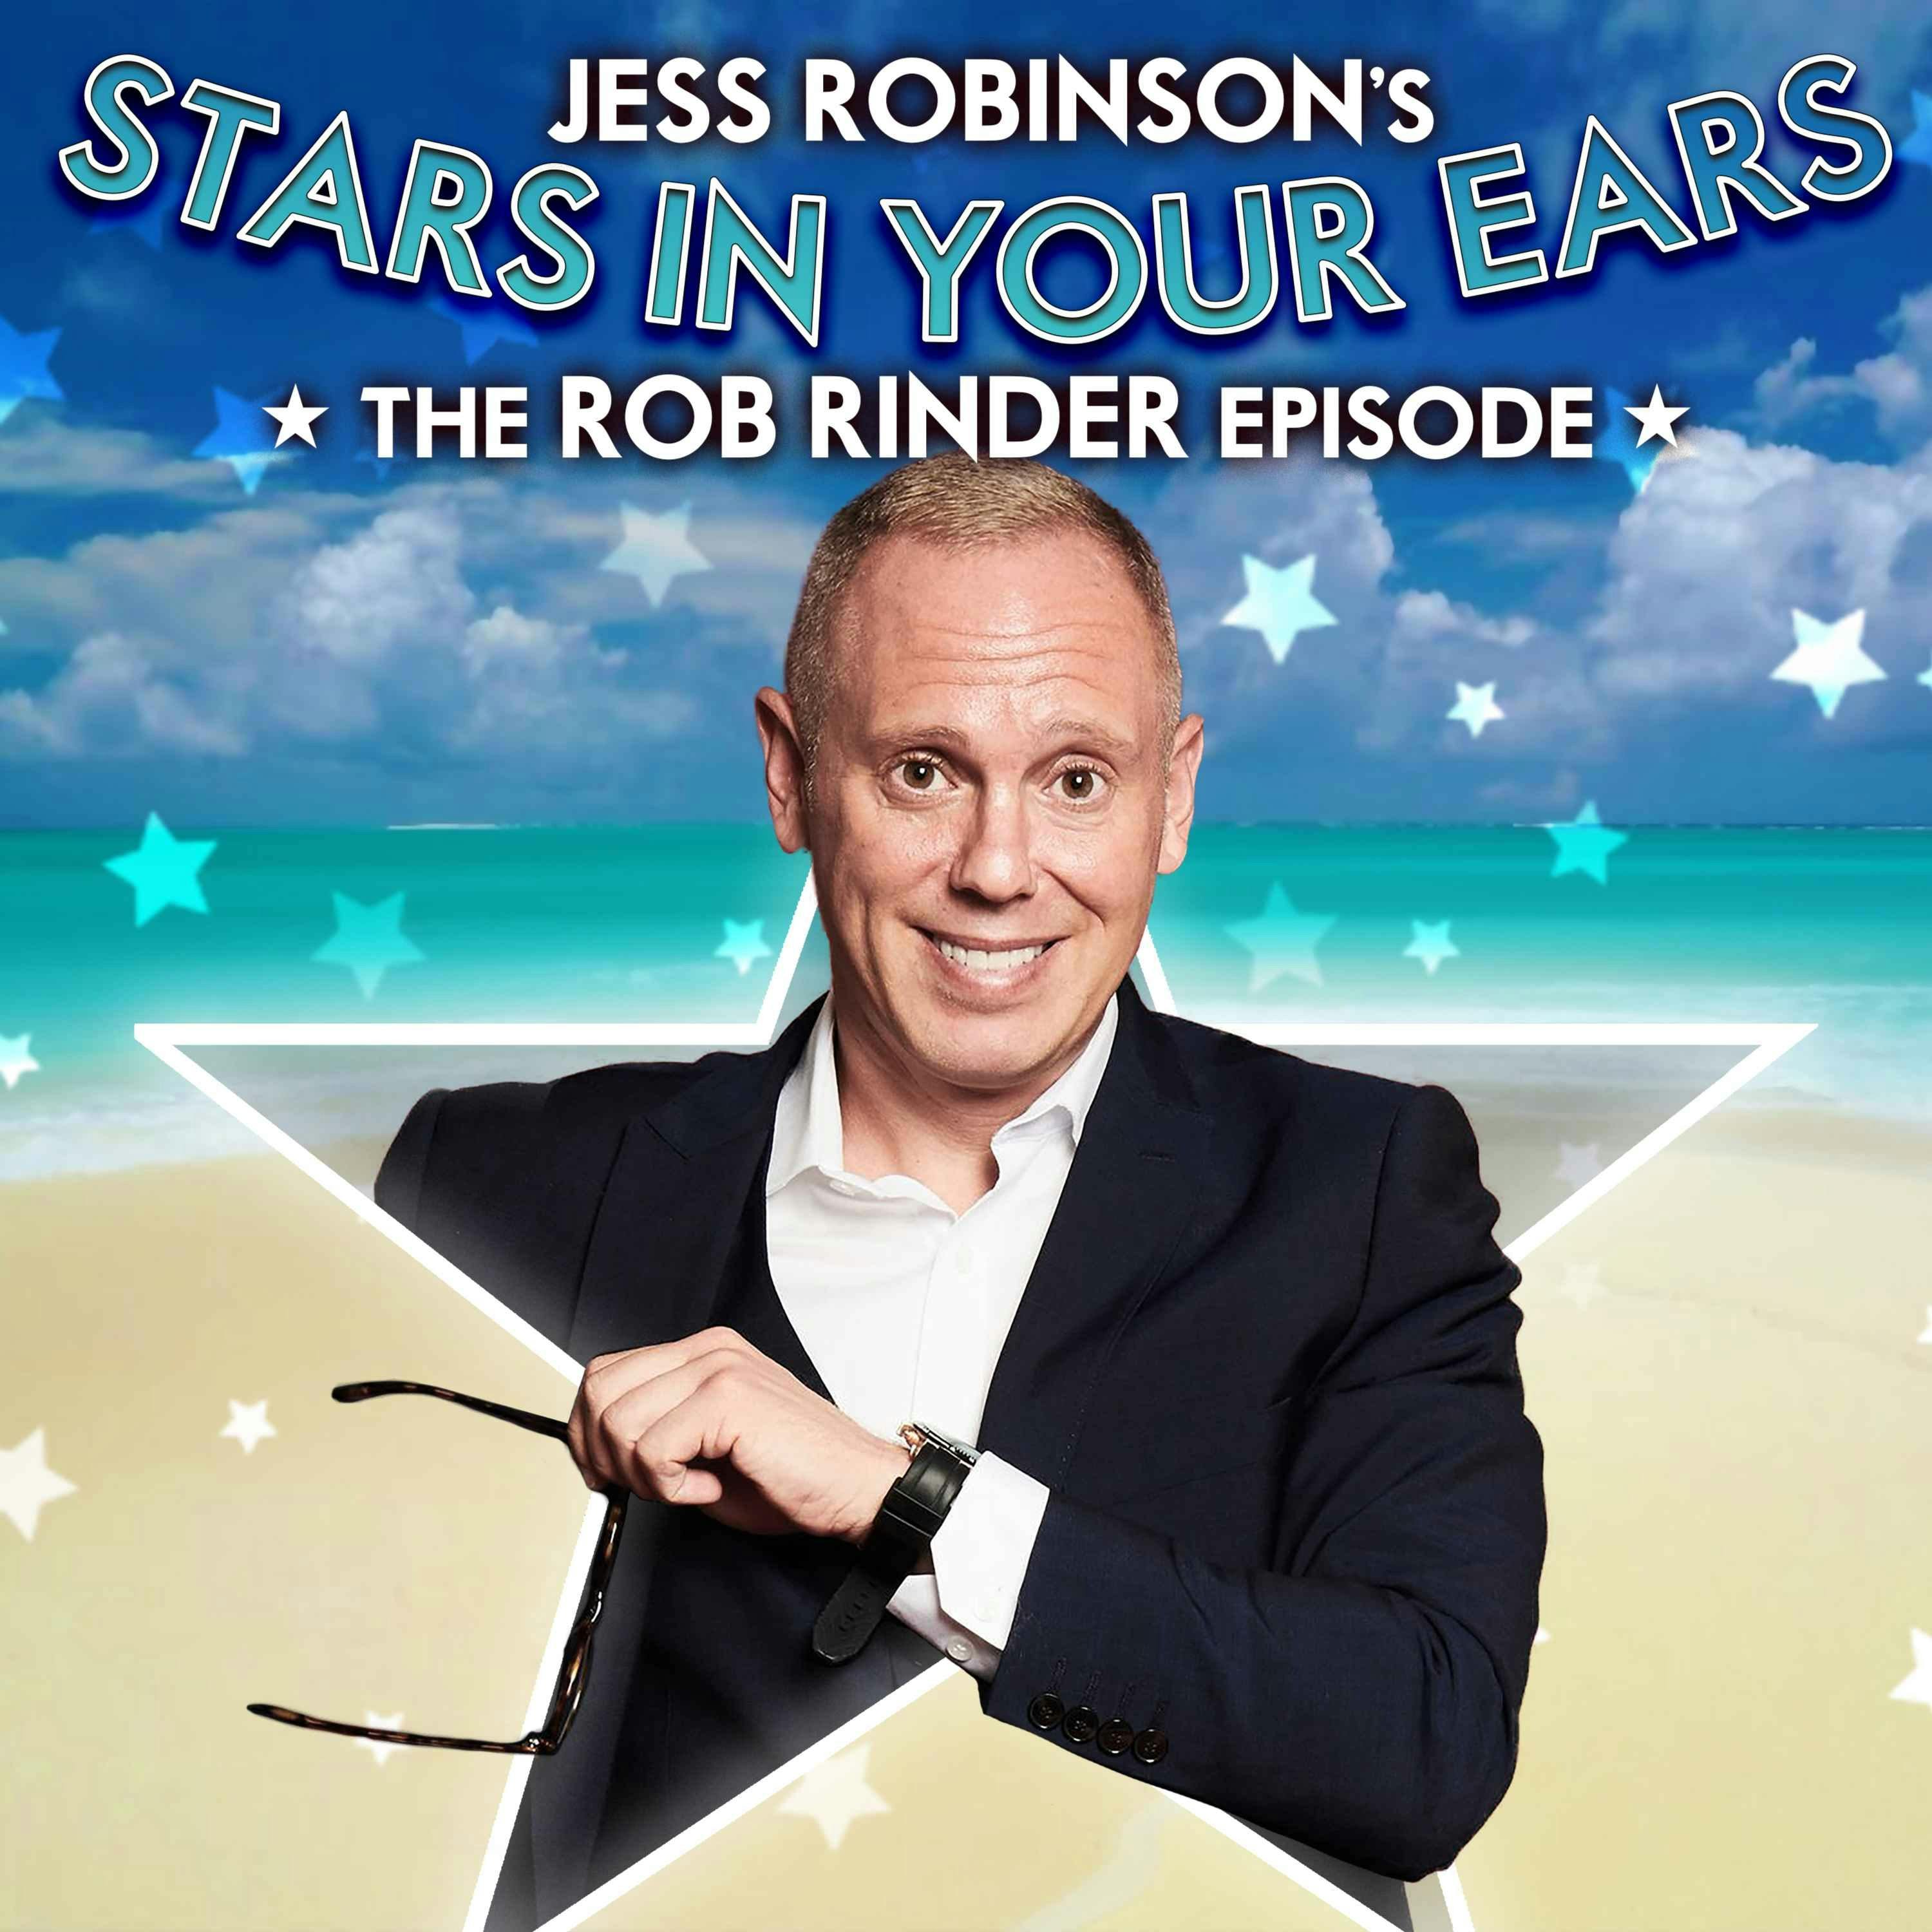 THE ROB RINDER EPISODE